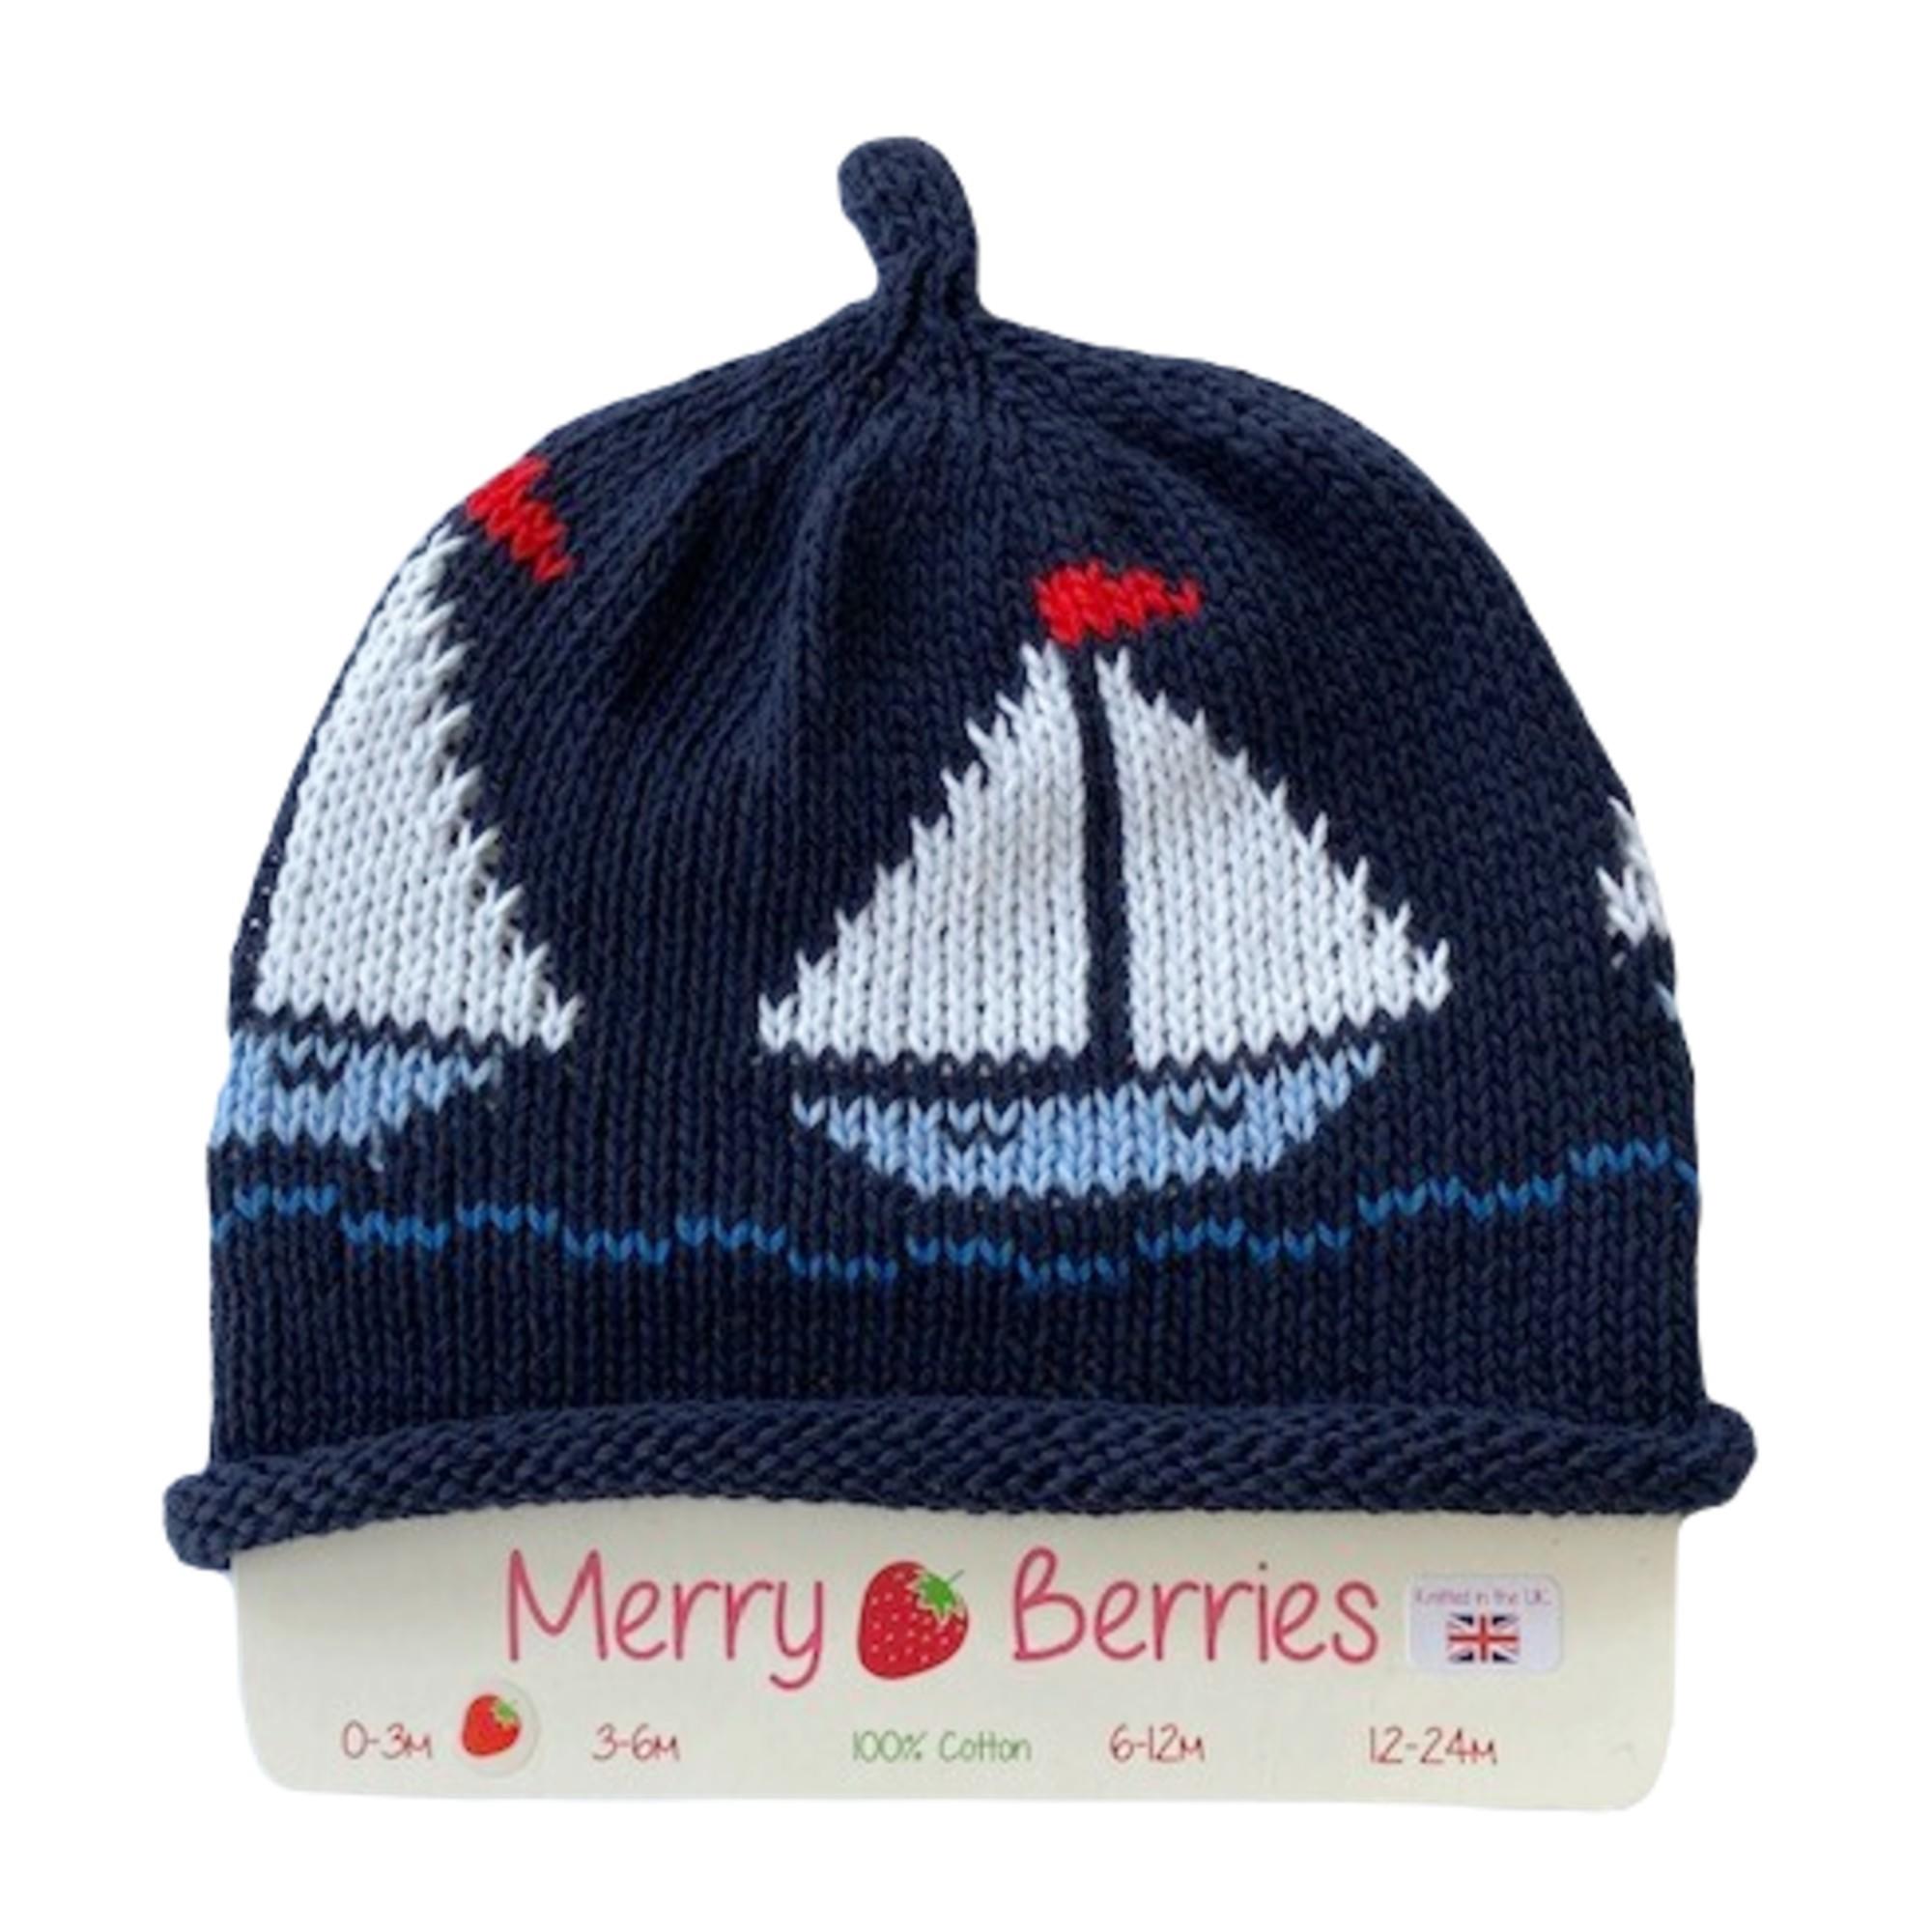 Merry Berries- Navy white Boat Knitted Baby Hat- 0-24 Months- Cotton